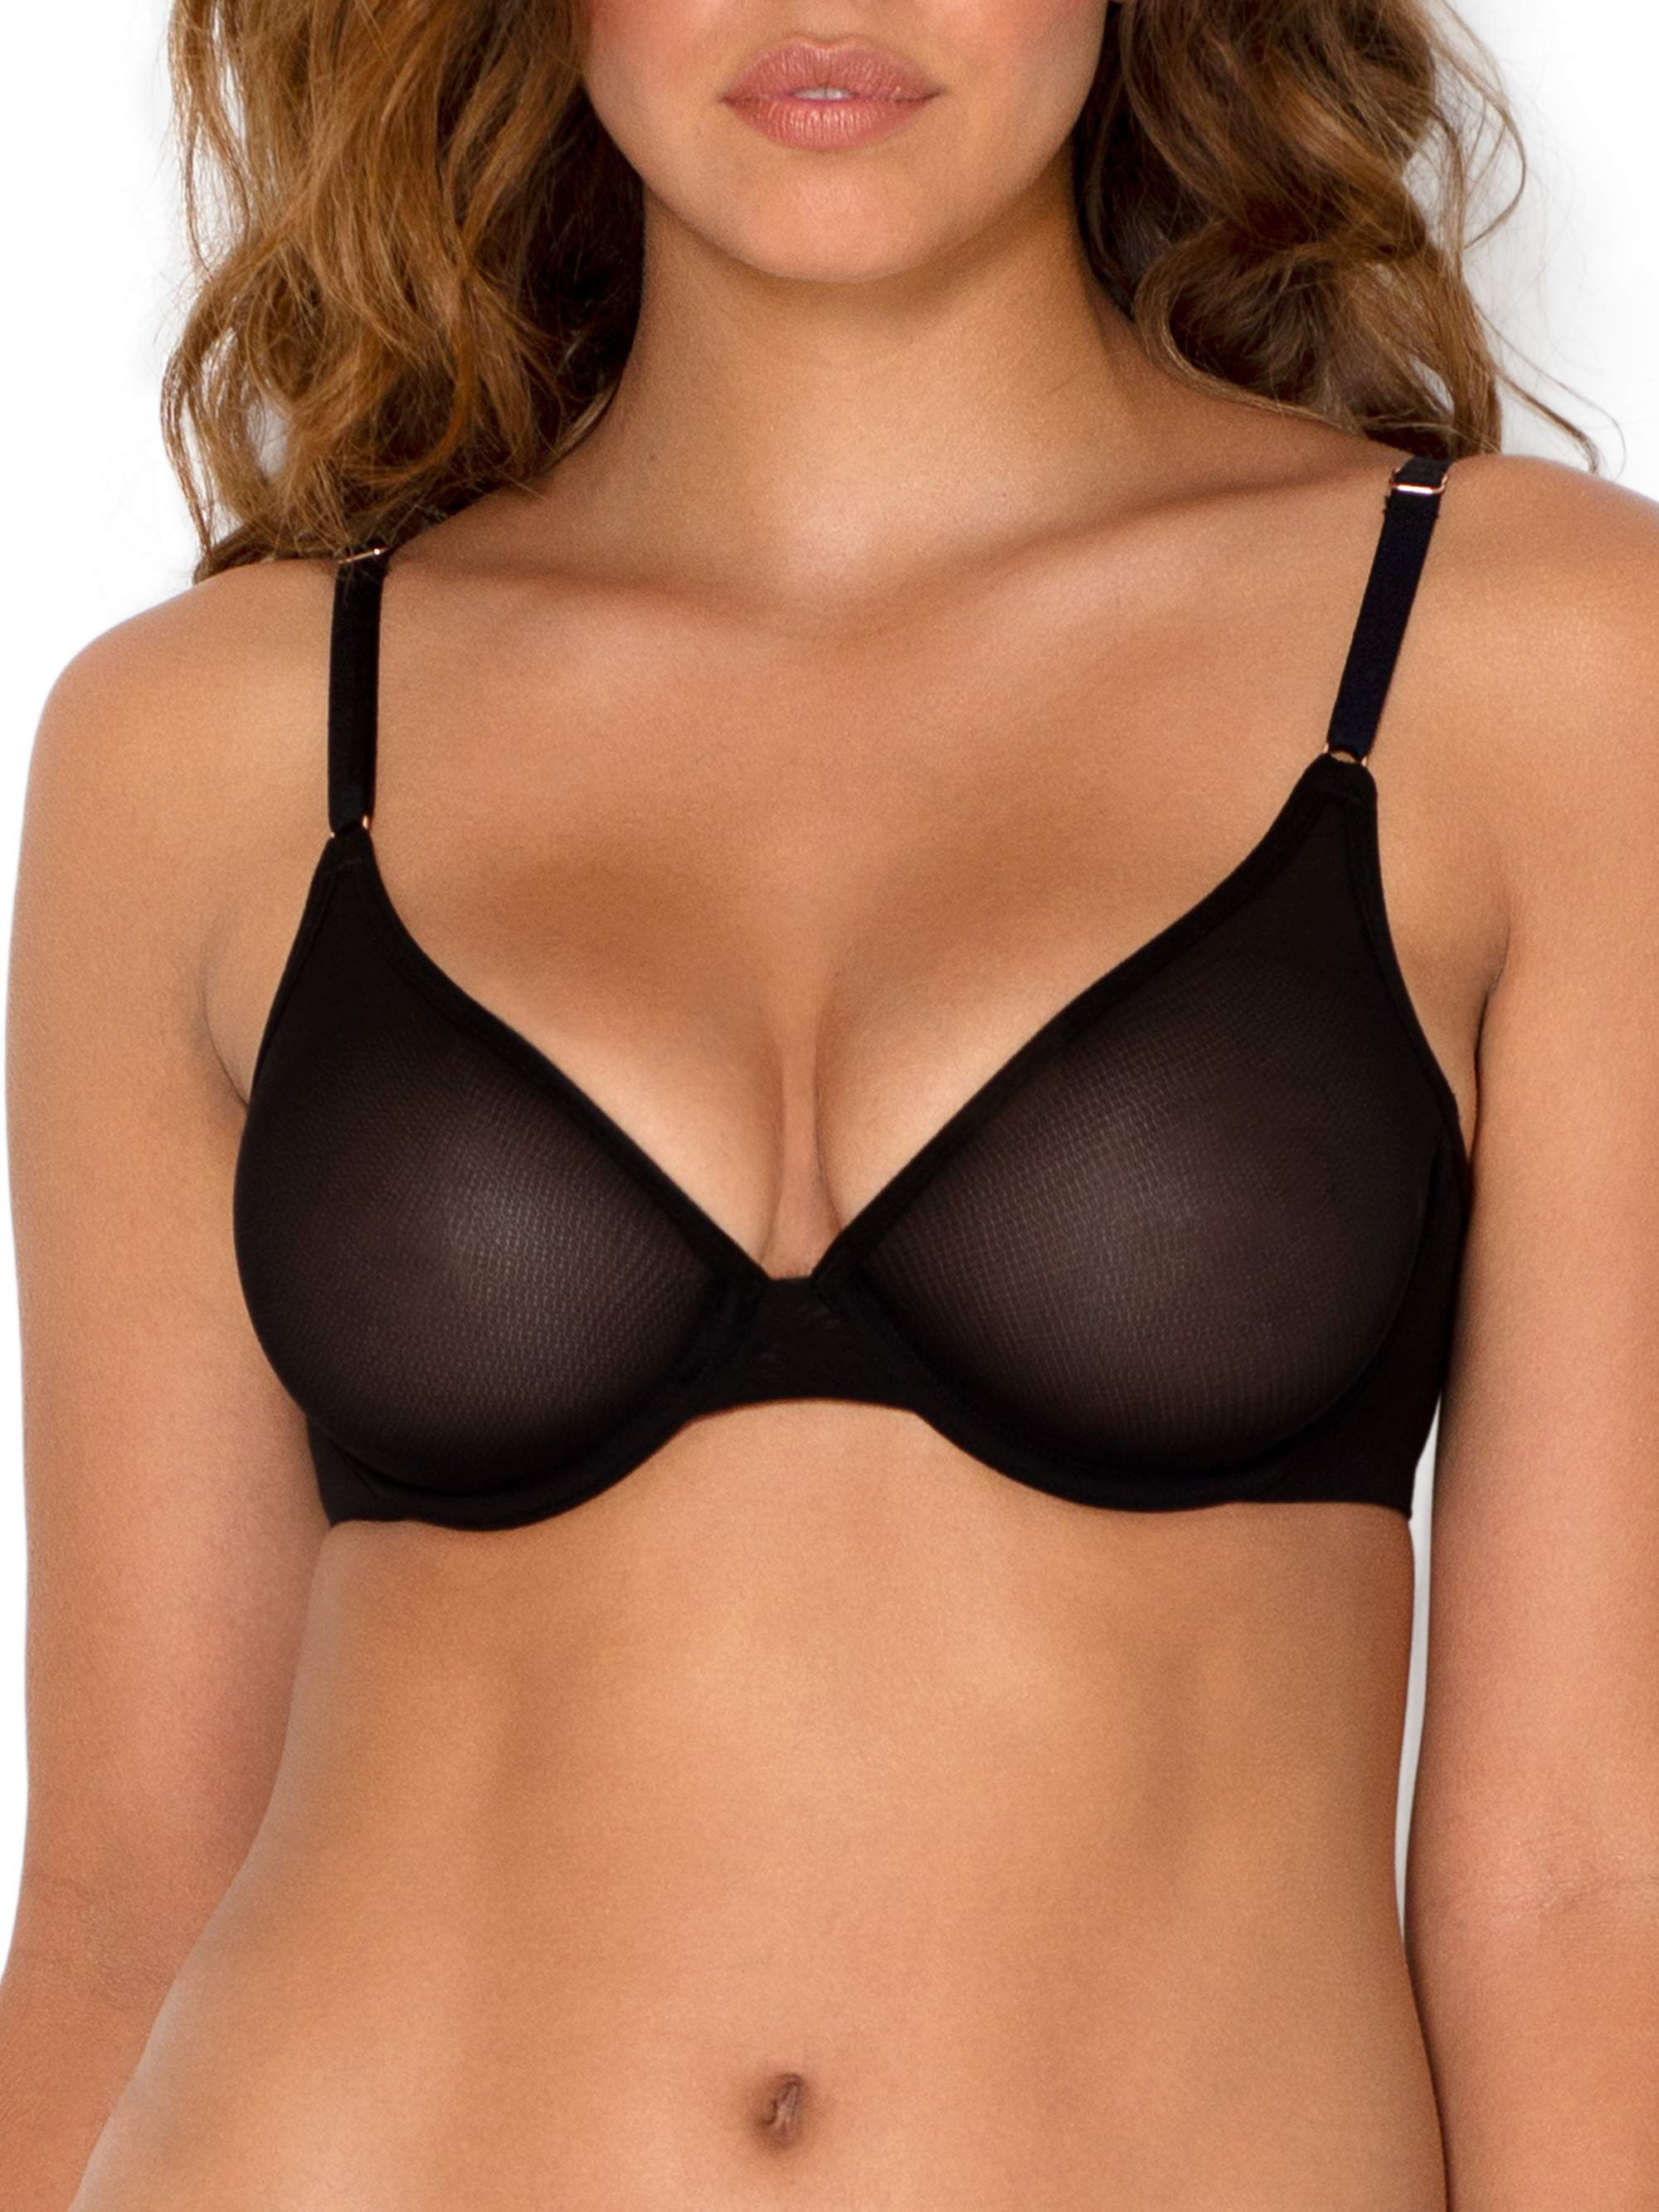 Details about   Wacoal Women's Clear and Classic Underwire Bra 